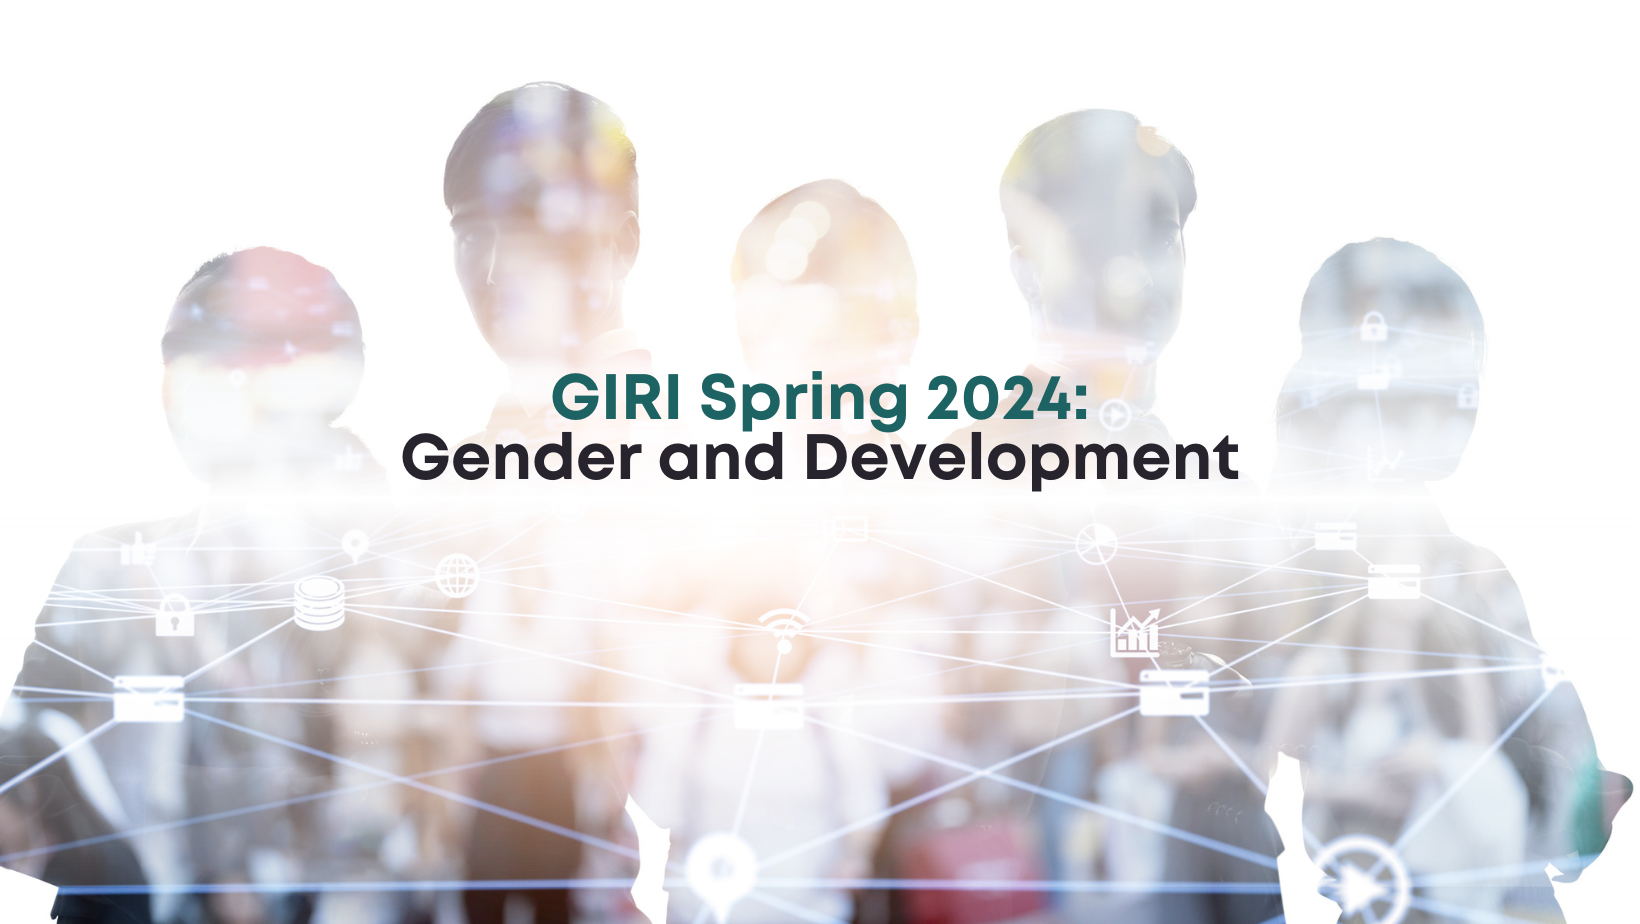 GIRI Spring 2024 banner with outlines of people in the background